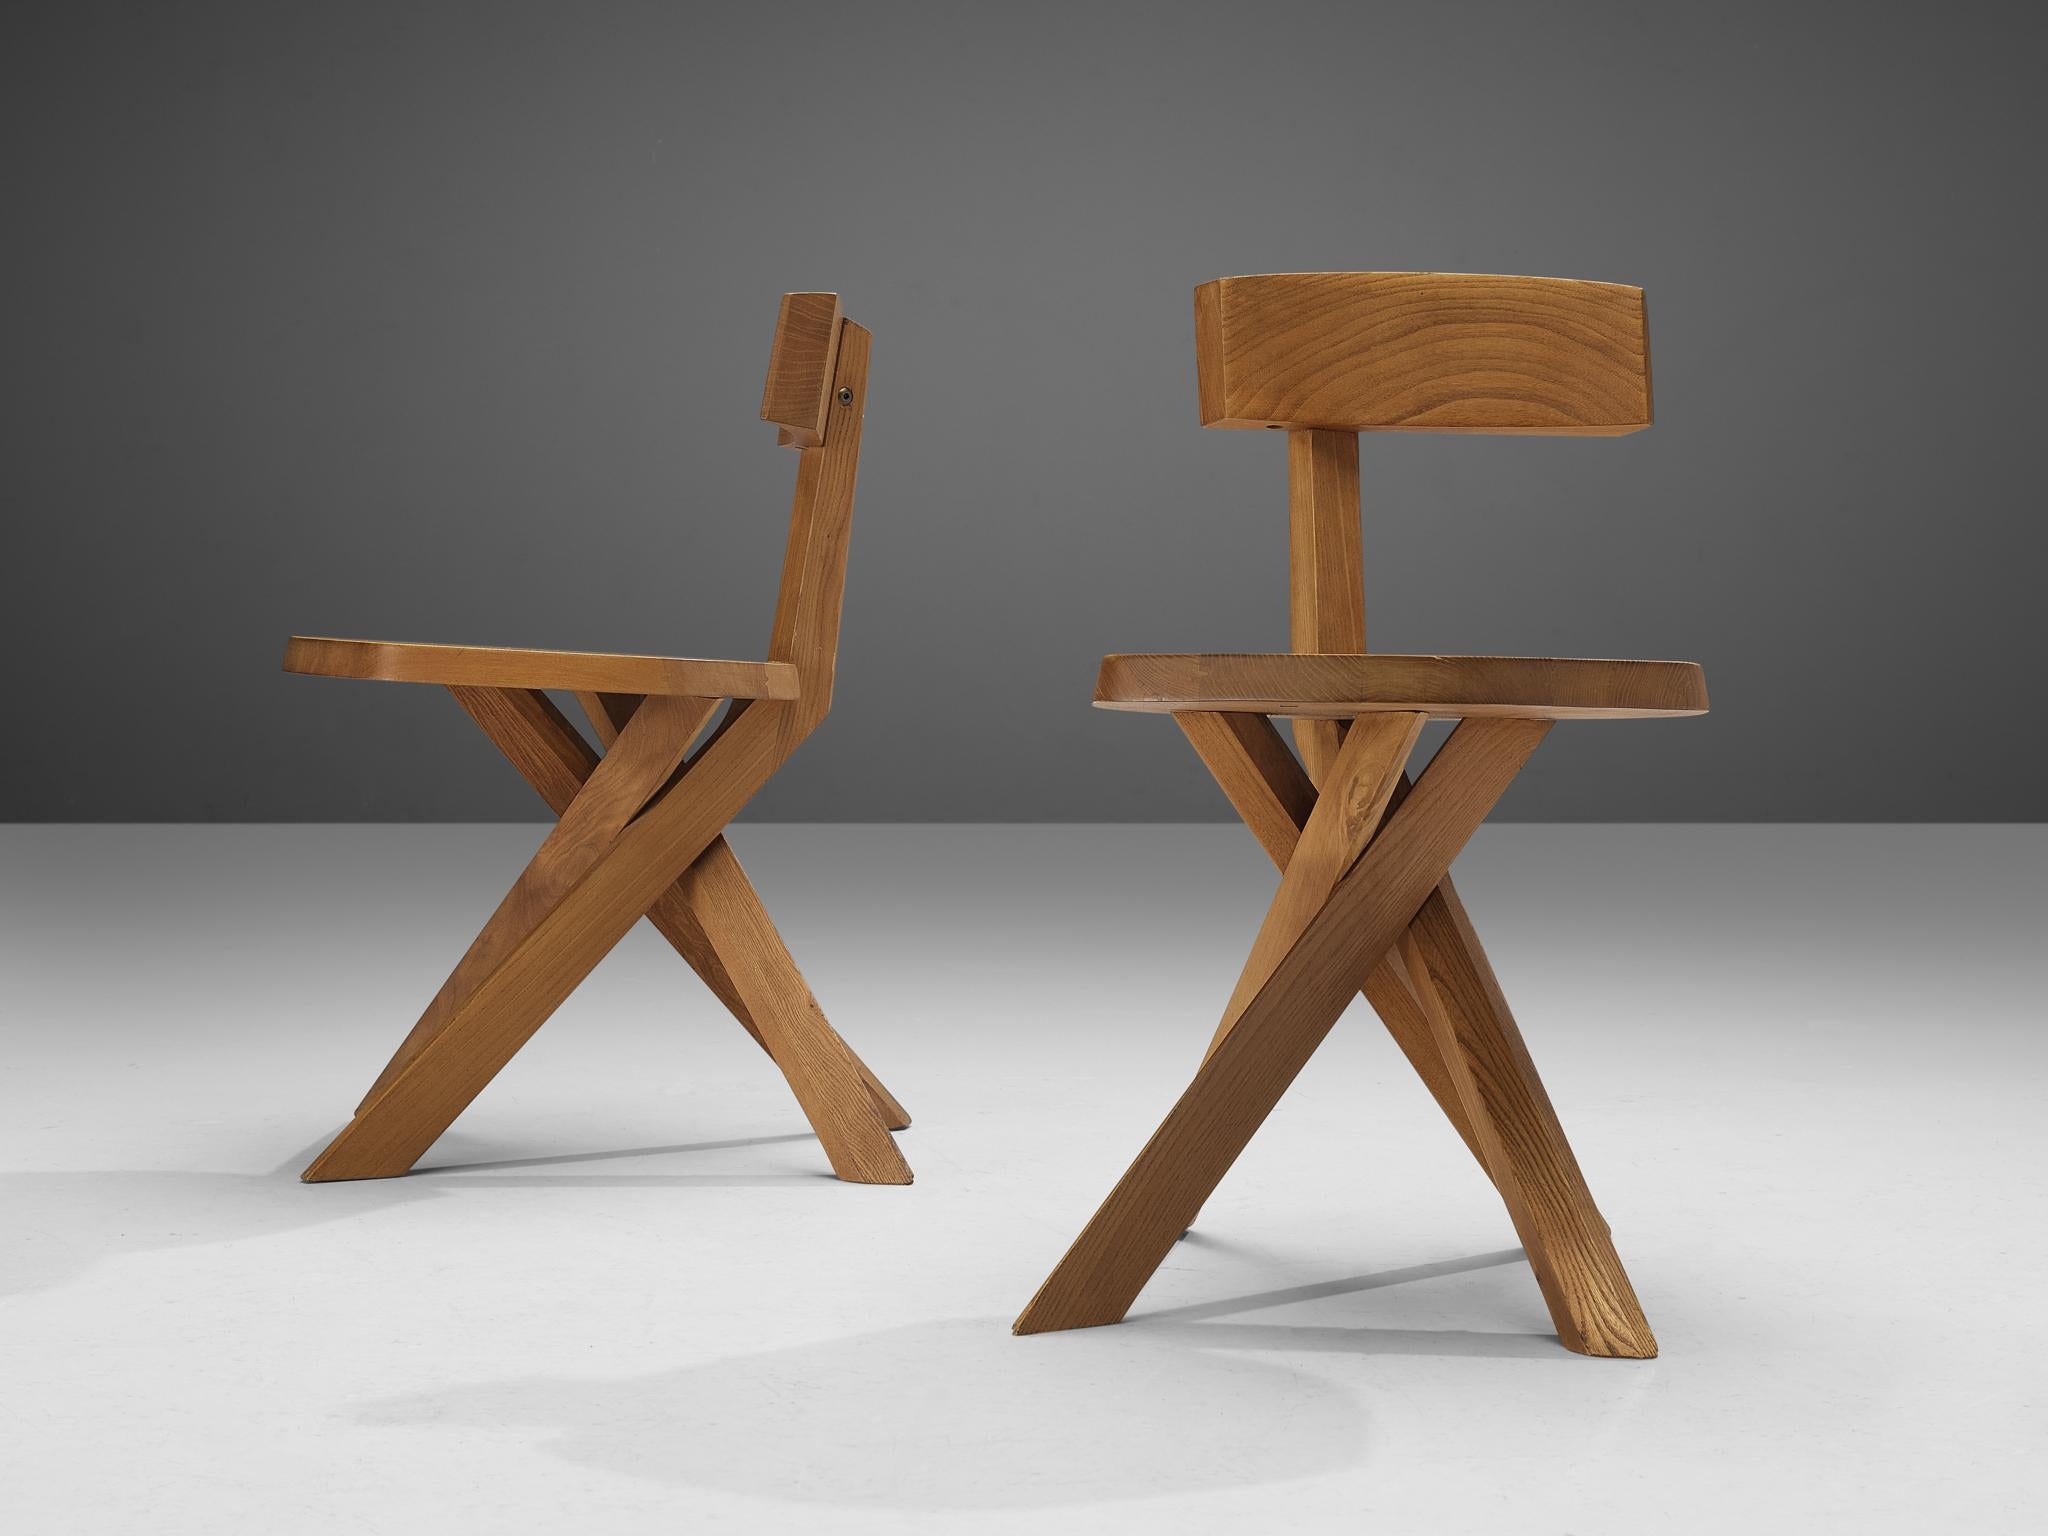 Pierre Chapo, dining chairs, model 'S34', elm, France, circa 1973

This asymmetrical pair of dining chairs with a twisted base are true icons of Pierre Chapo's playful and solemn designs. The backrest is placed just slightly out of the middle which